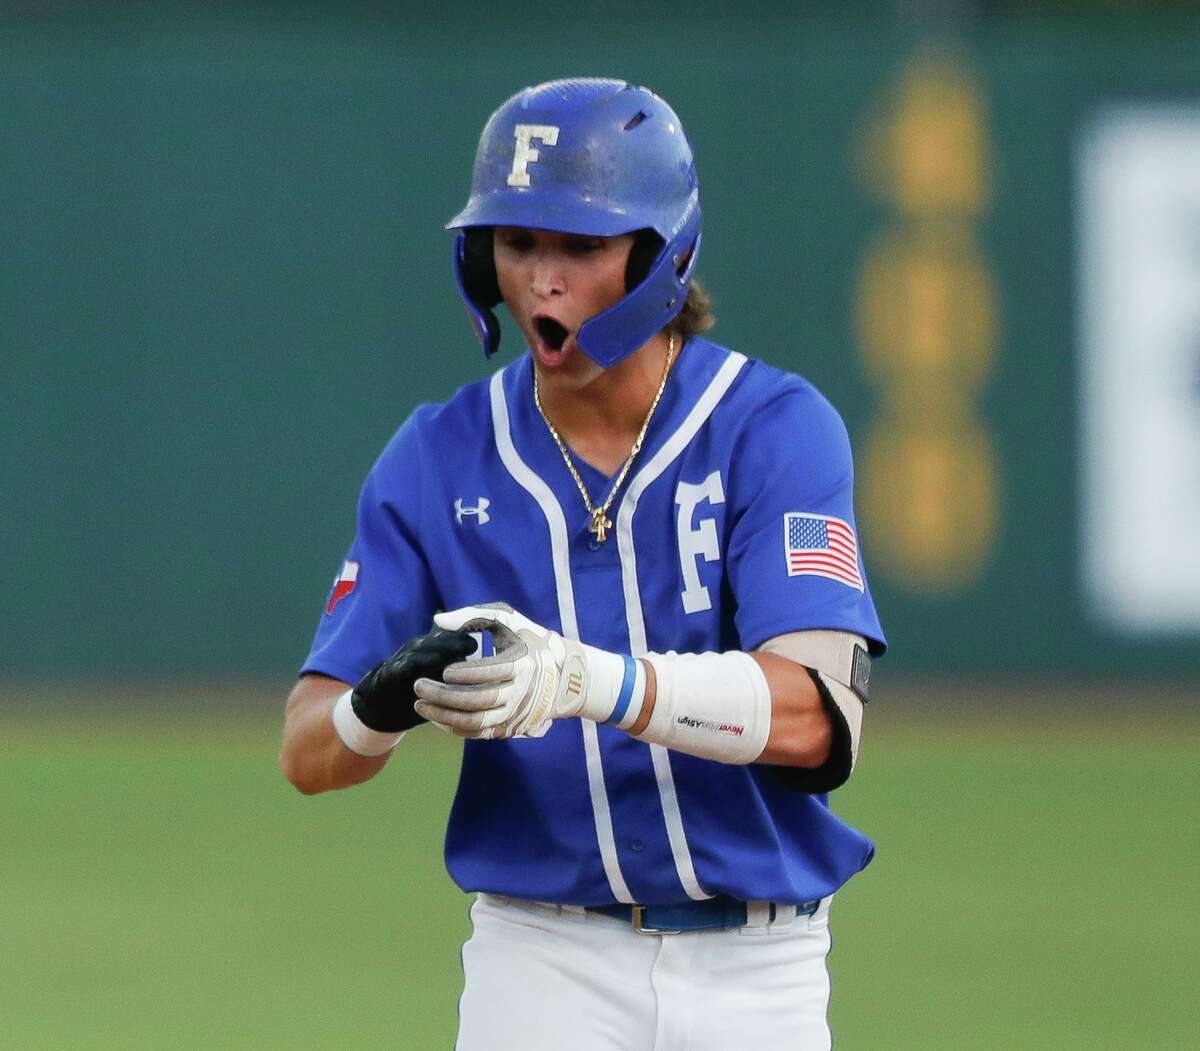 Kyle Lockhart #13 of Friendswood reacts after hitting an RBI single in the fourth inning of Game 1 during the Region III-5A high school baseball championship series at Rice University , Wednesday, June 1, 2022, in Houston. Friendswood scored four runs in the inning to take a 4-1 lead.